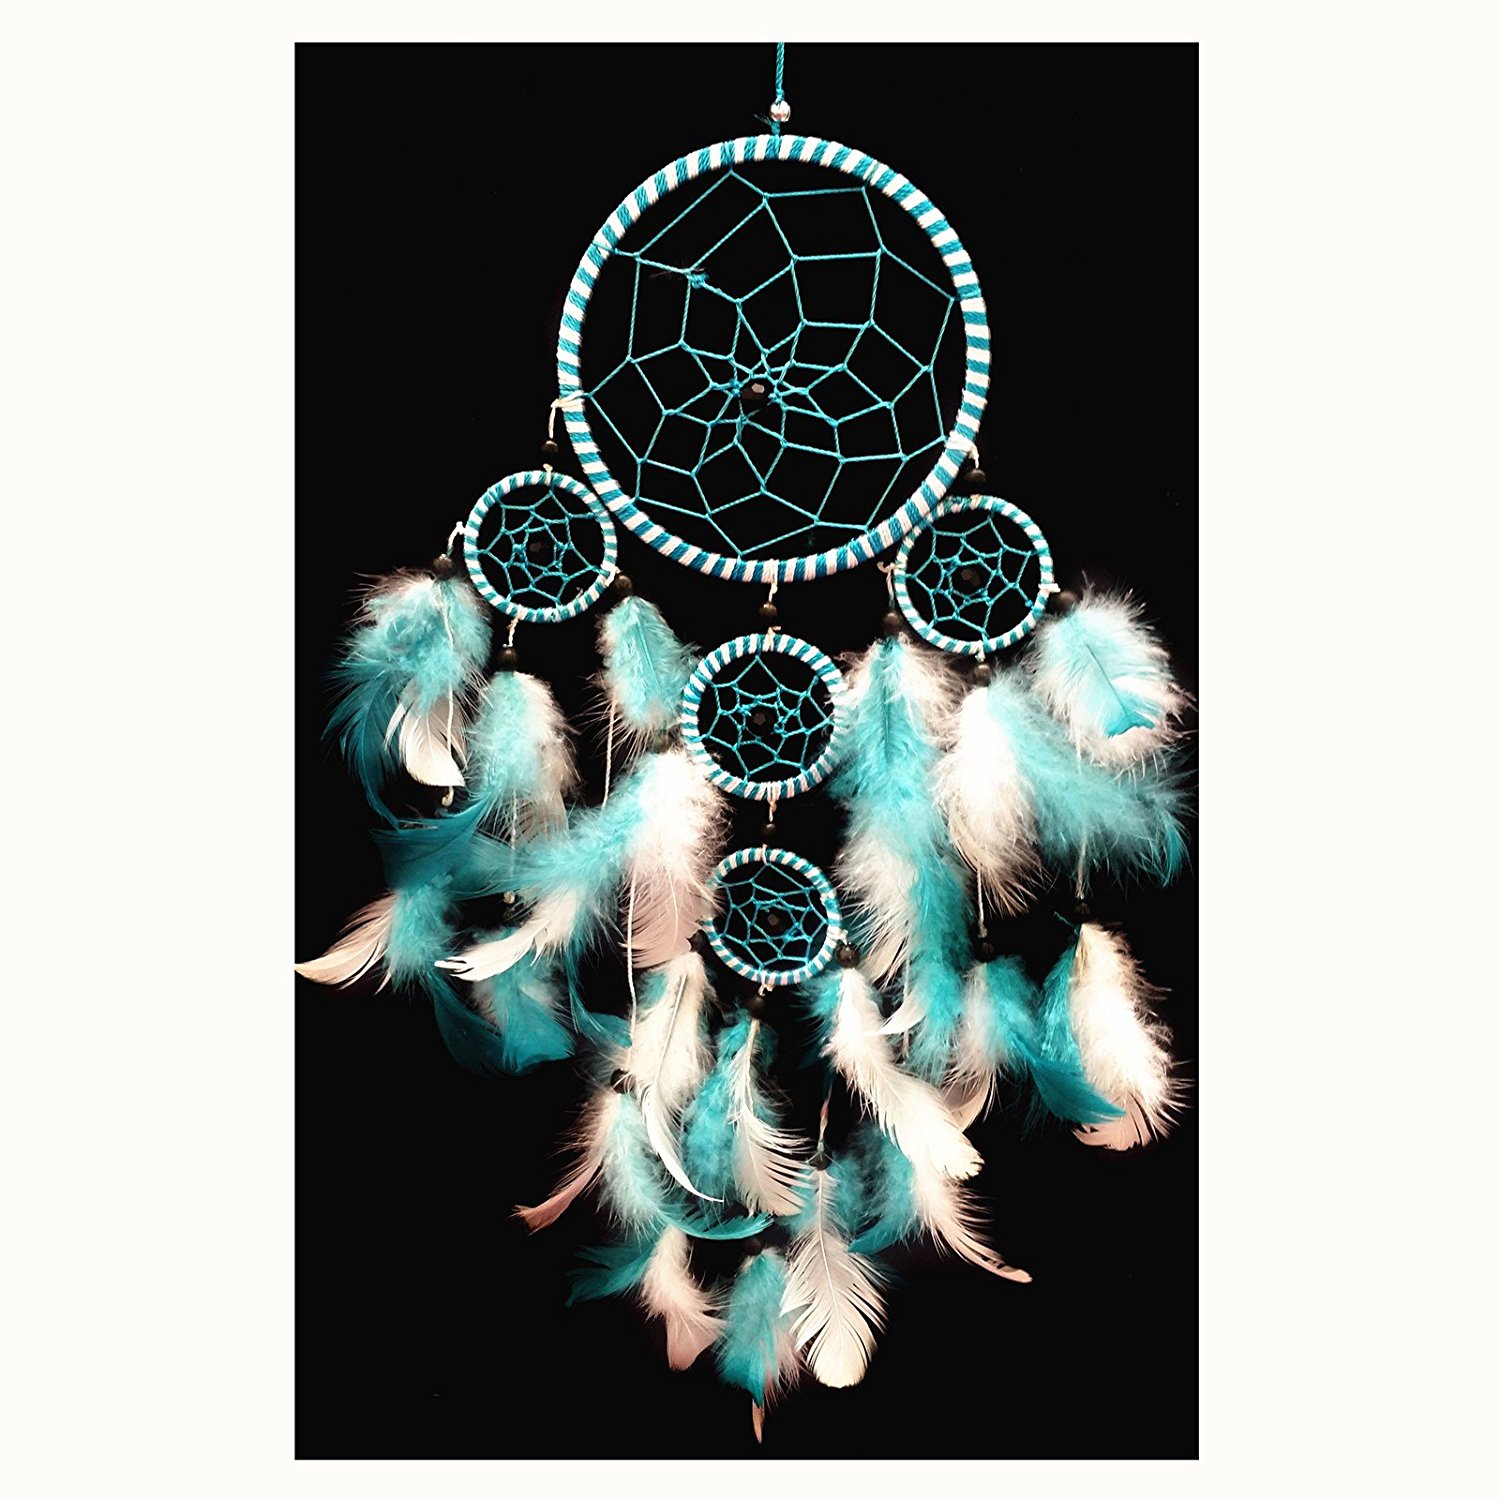 Amazon.com: Handmade Dream Catcher with Feathers Wall Hanging ...